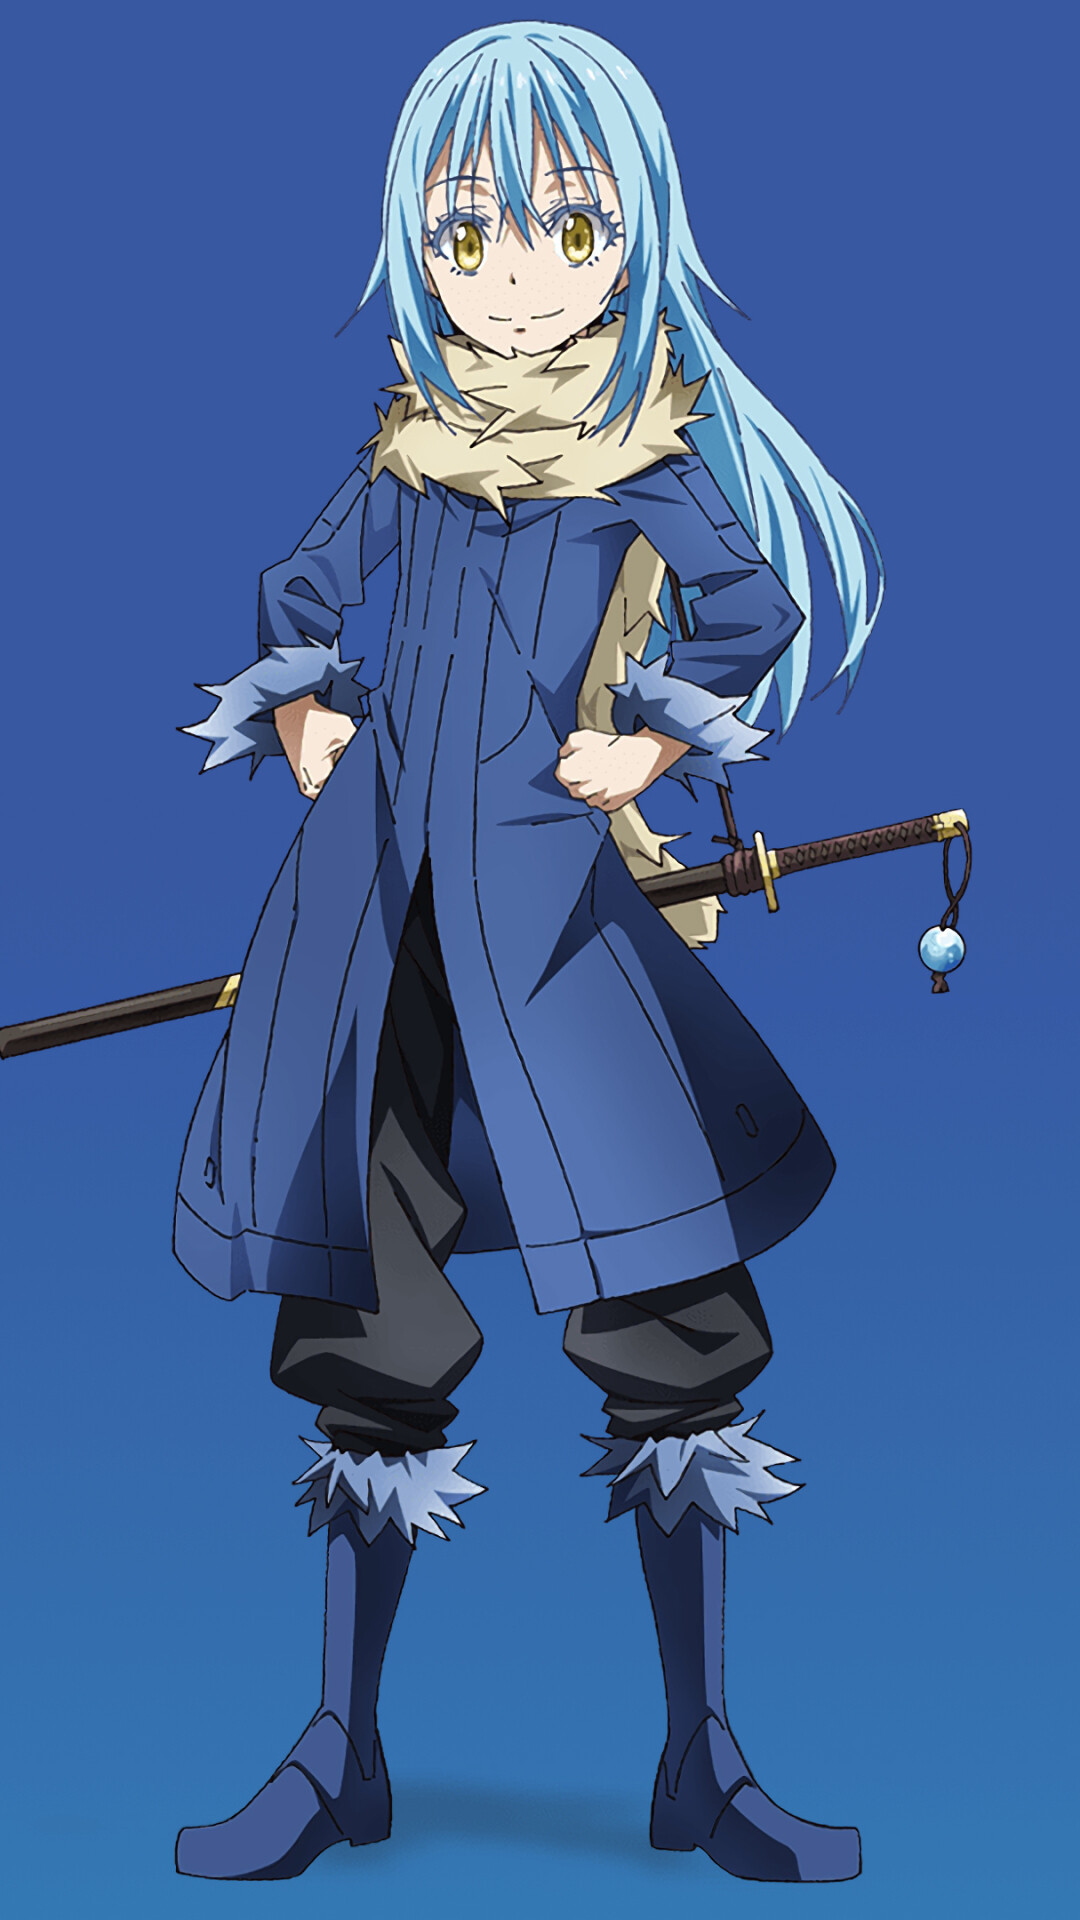 That Time I Got Reincarnated as a Slime: A man who is killed and reincarnated in another world as a slime named Rimuru. 1080x1920 Full HD Wallpaper.